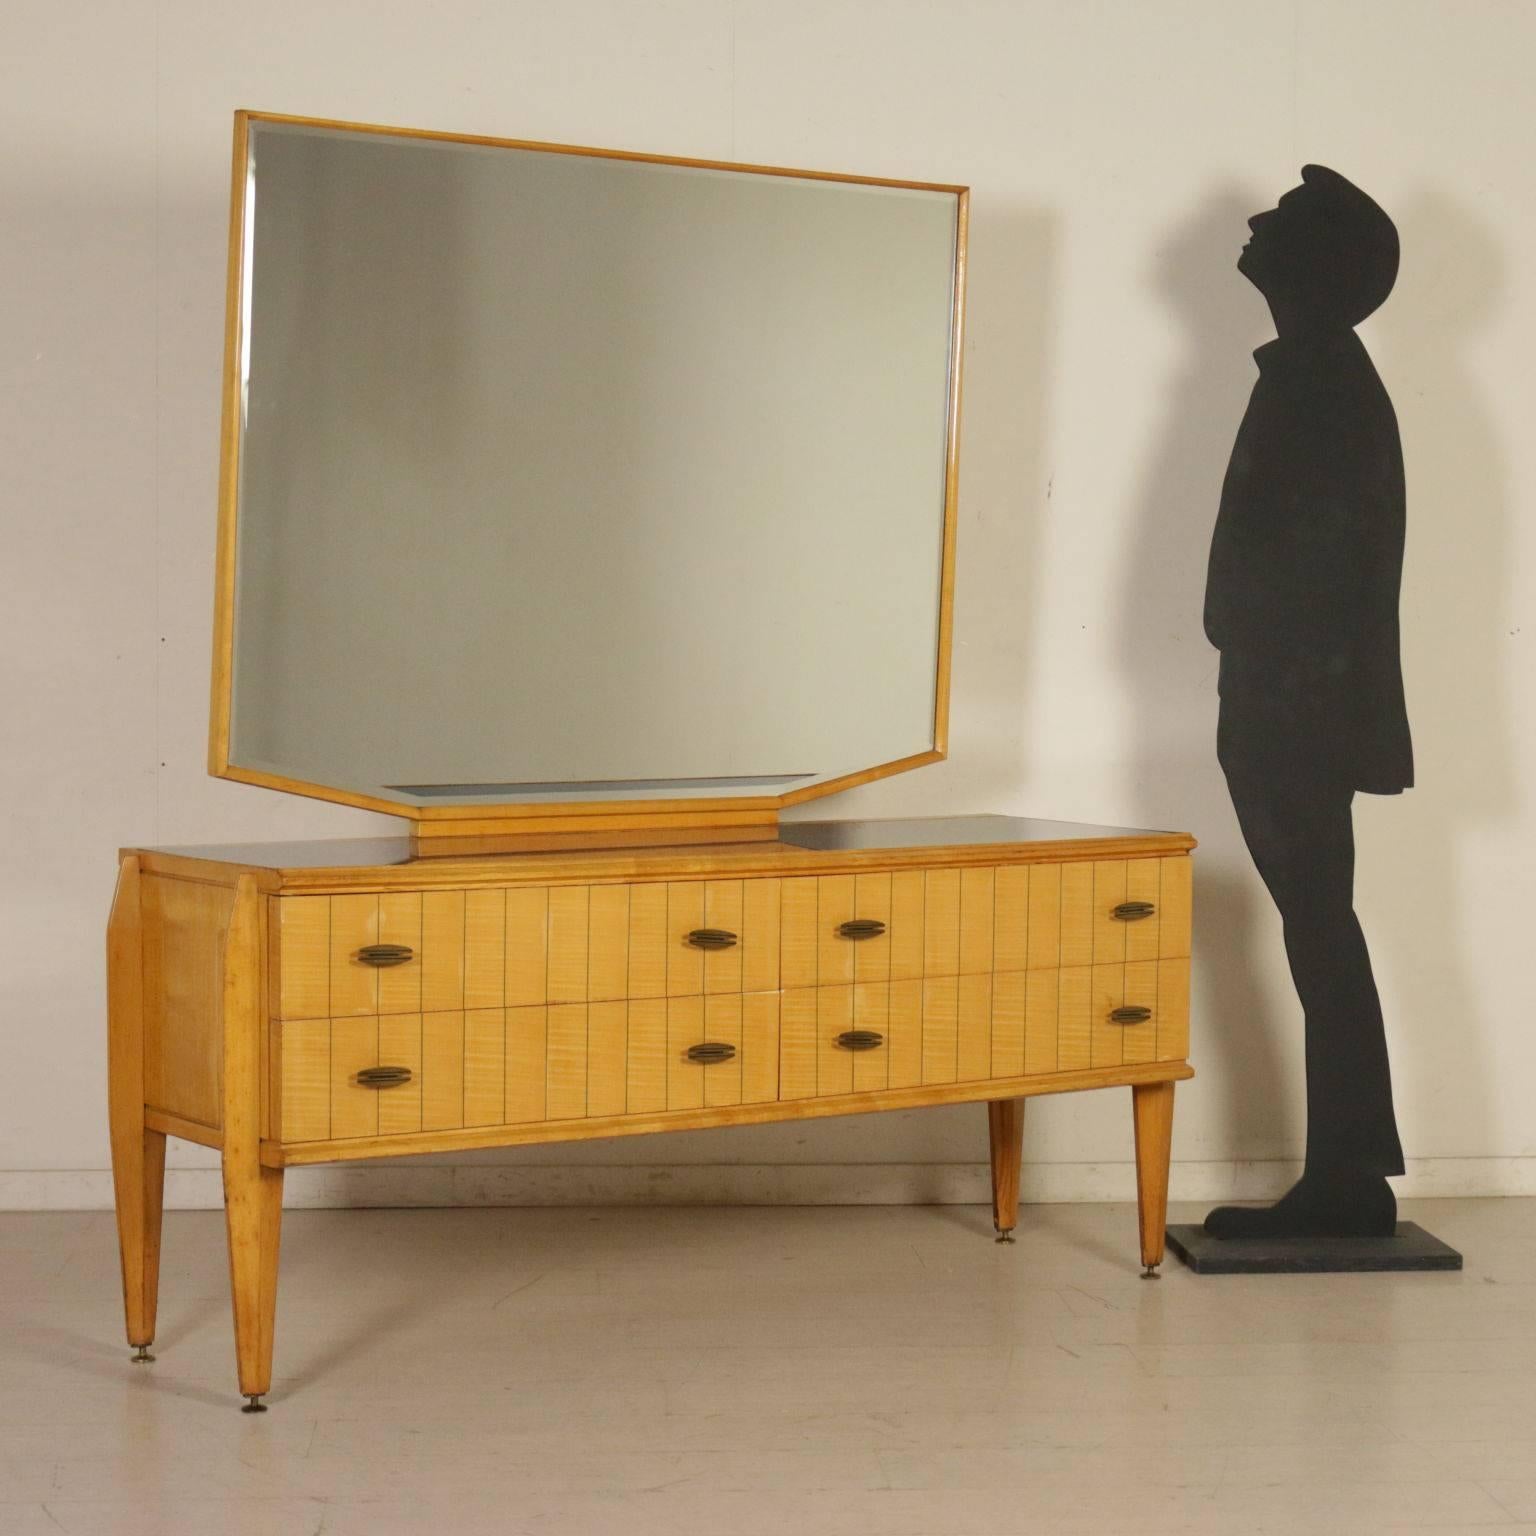 A chest of drawers with mirror, maple with beech uprights, retro treated glass and brass. Manufactured in Italy, 1950s-1960s.